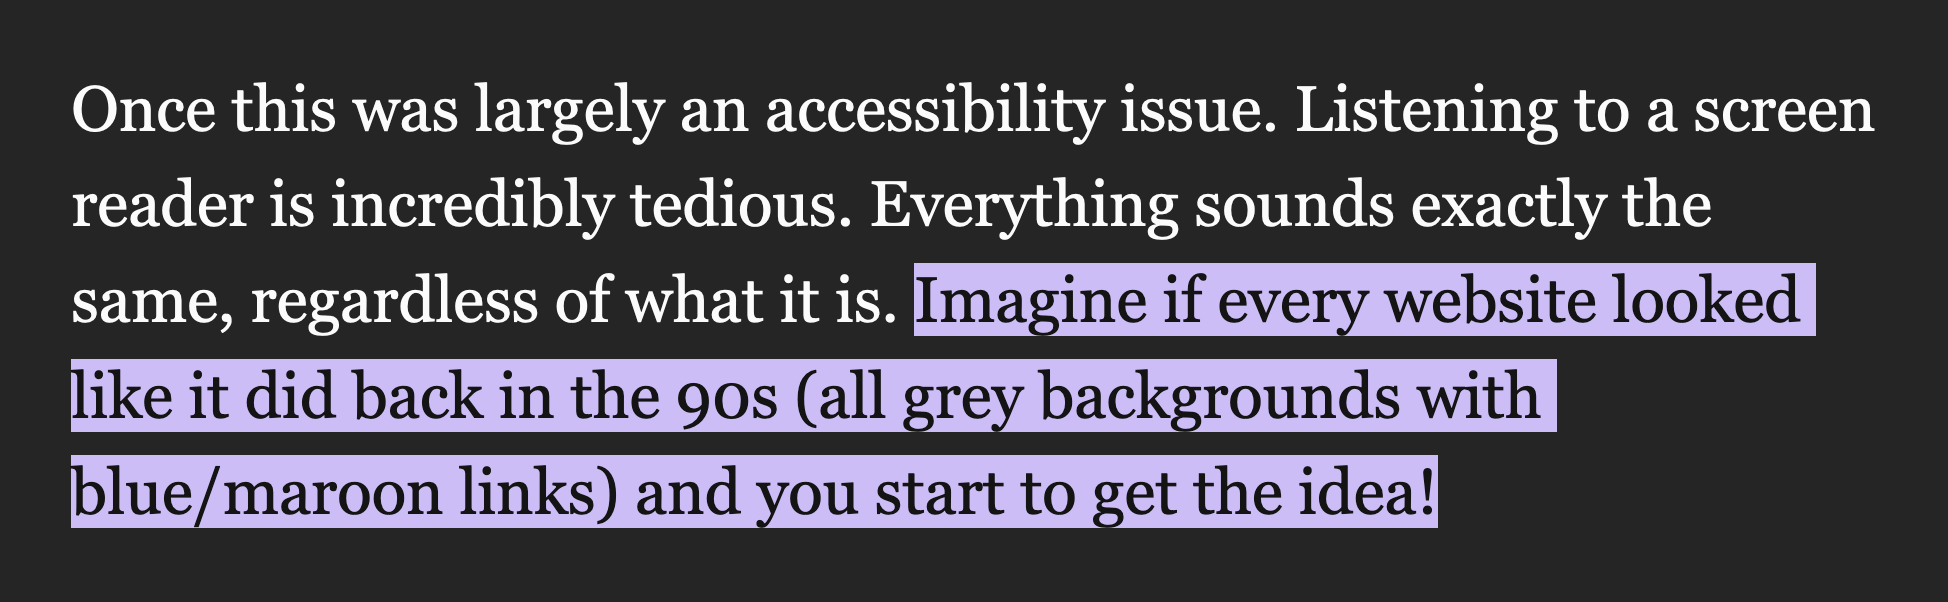 Once this was largely an accessibility issue. Listening to a screen reader is incredibly tedious. Everything sounds exactly the same, regardless of what it is. Imagine if every website looked like it did back in the 90s (all grey backgrounds with blue/maroon links) and you start to get the idea!